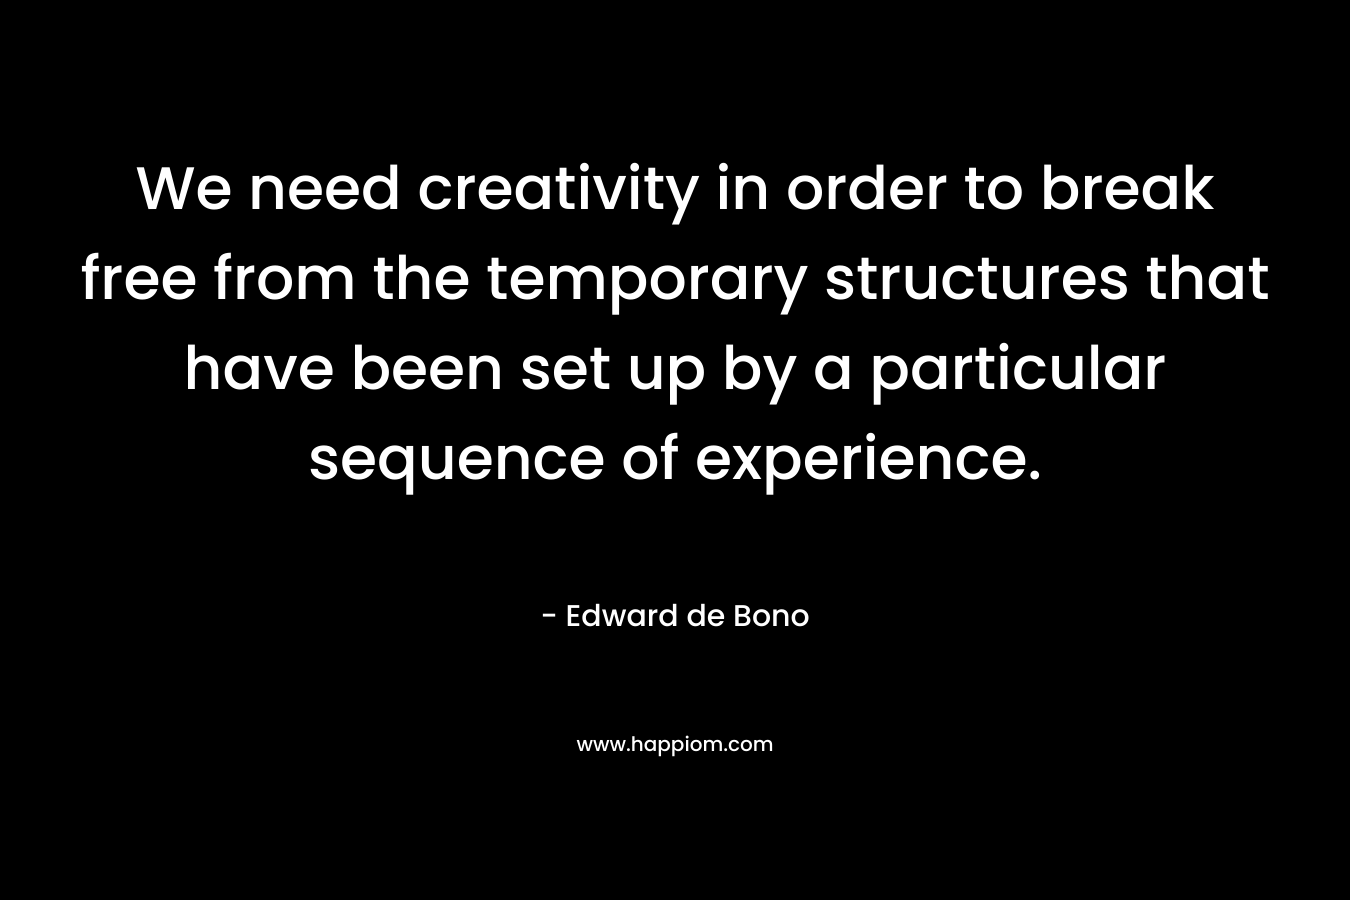 We need creativity in order to break free from the temporary structures that have been set up by a particular sequence of experience. – Edward de Bono